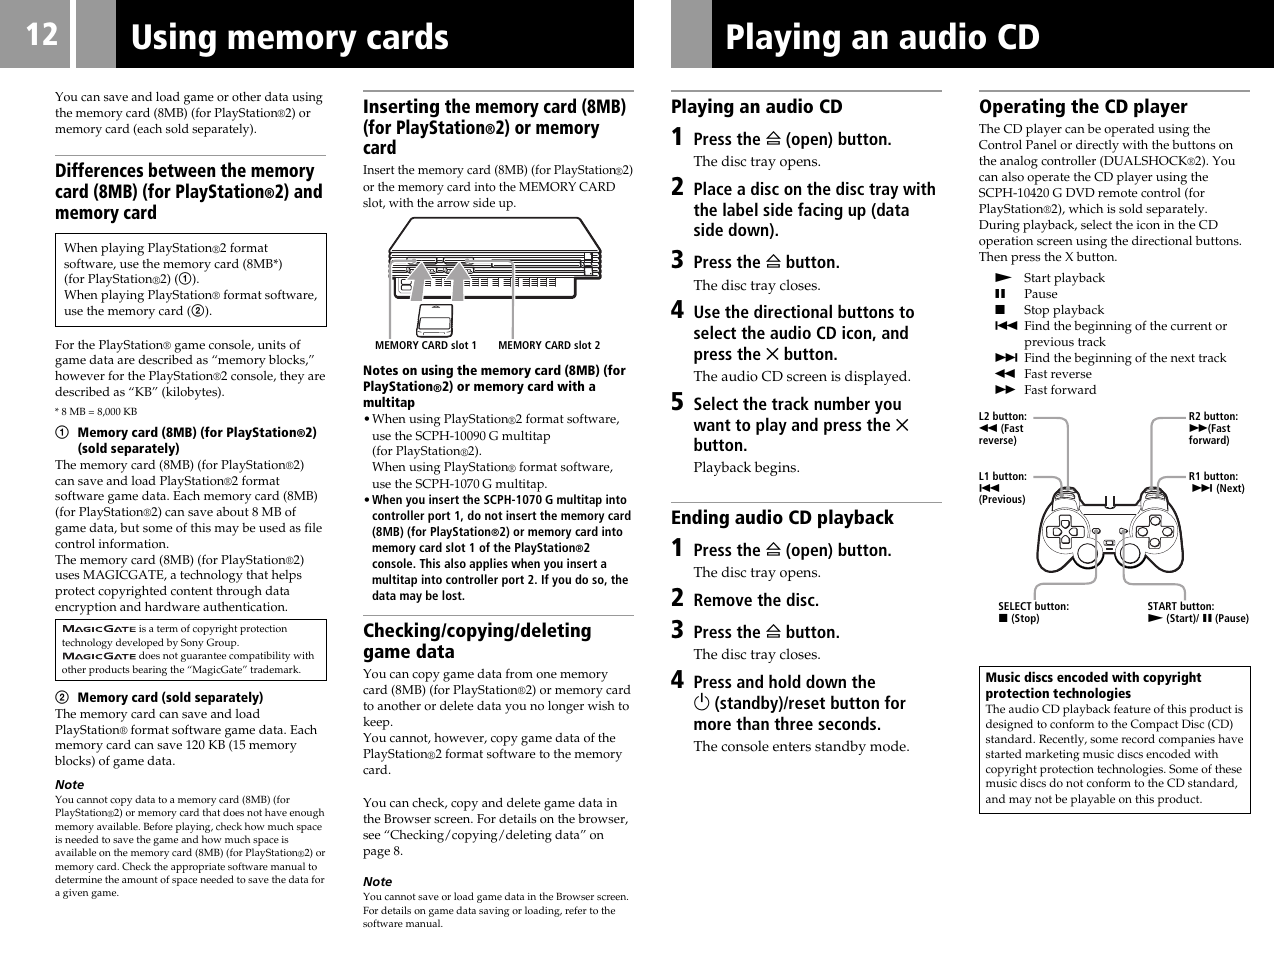 Playing an audio cd, Checking/copying/deleting game data, Ending audio cd playback | Operating the cd player | Sony SCPH-50006 User Manual | Page 12 / 56